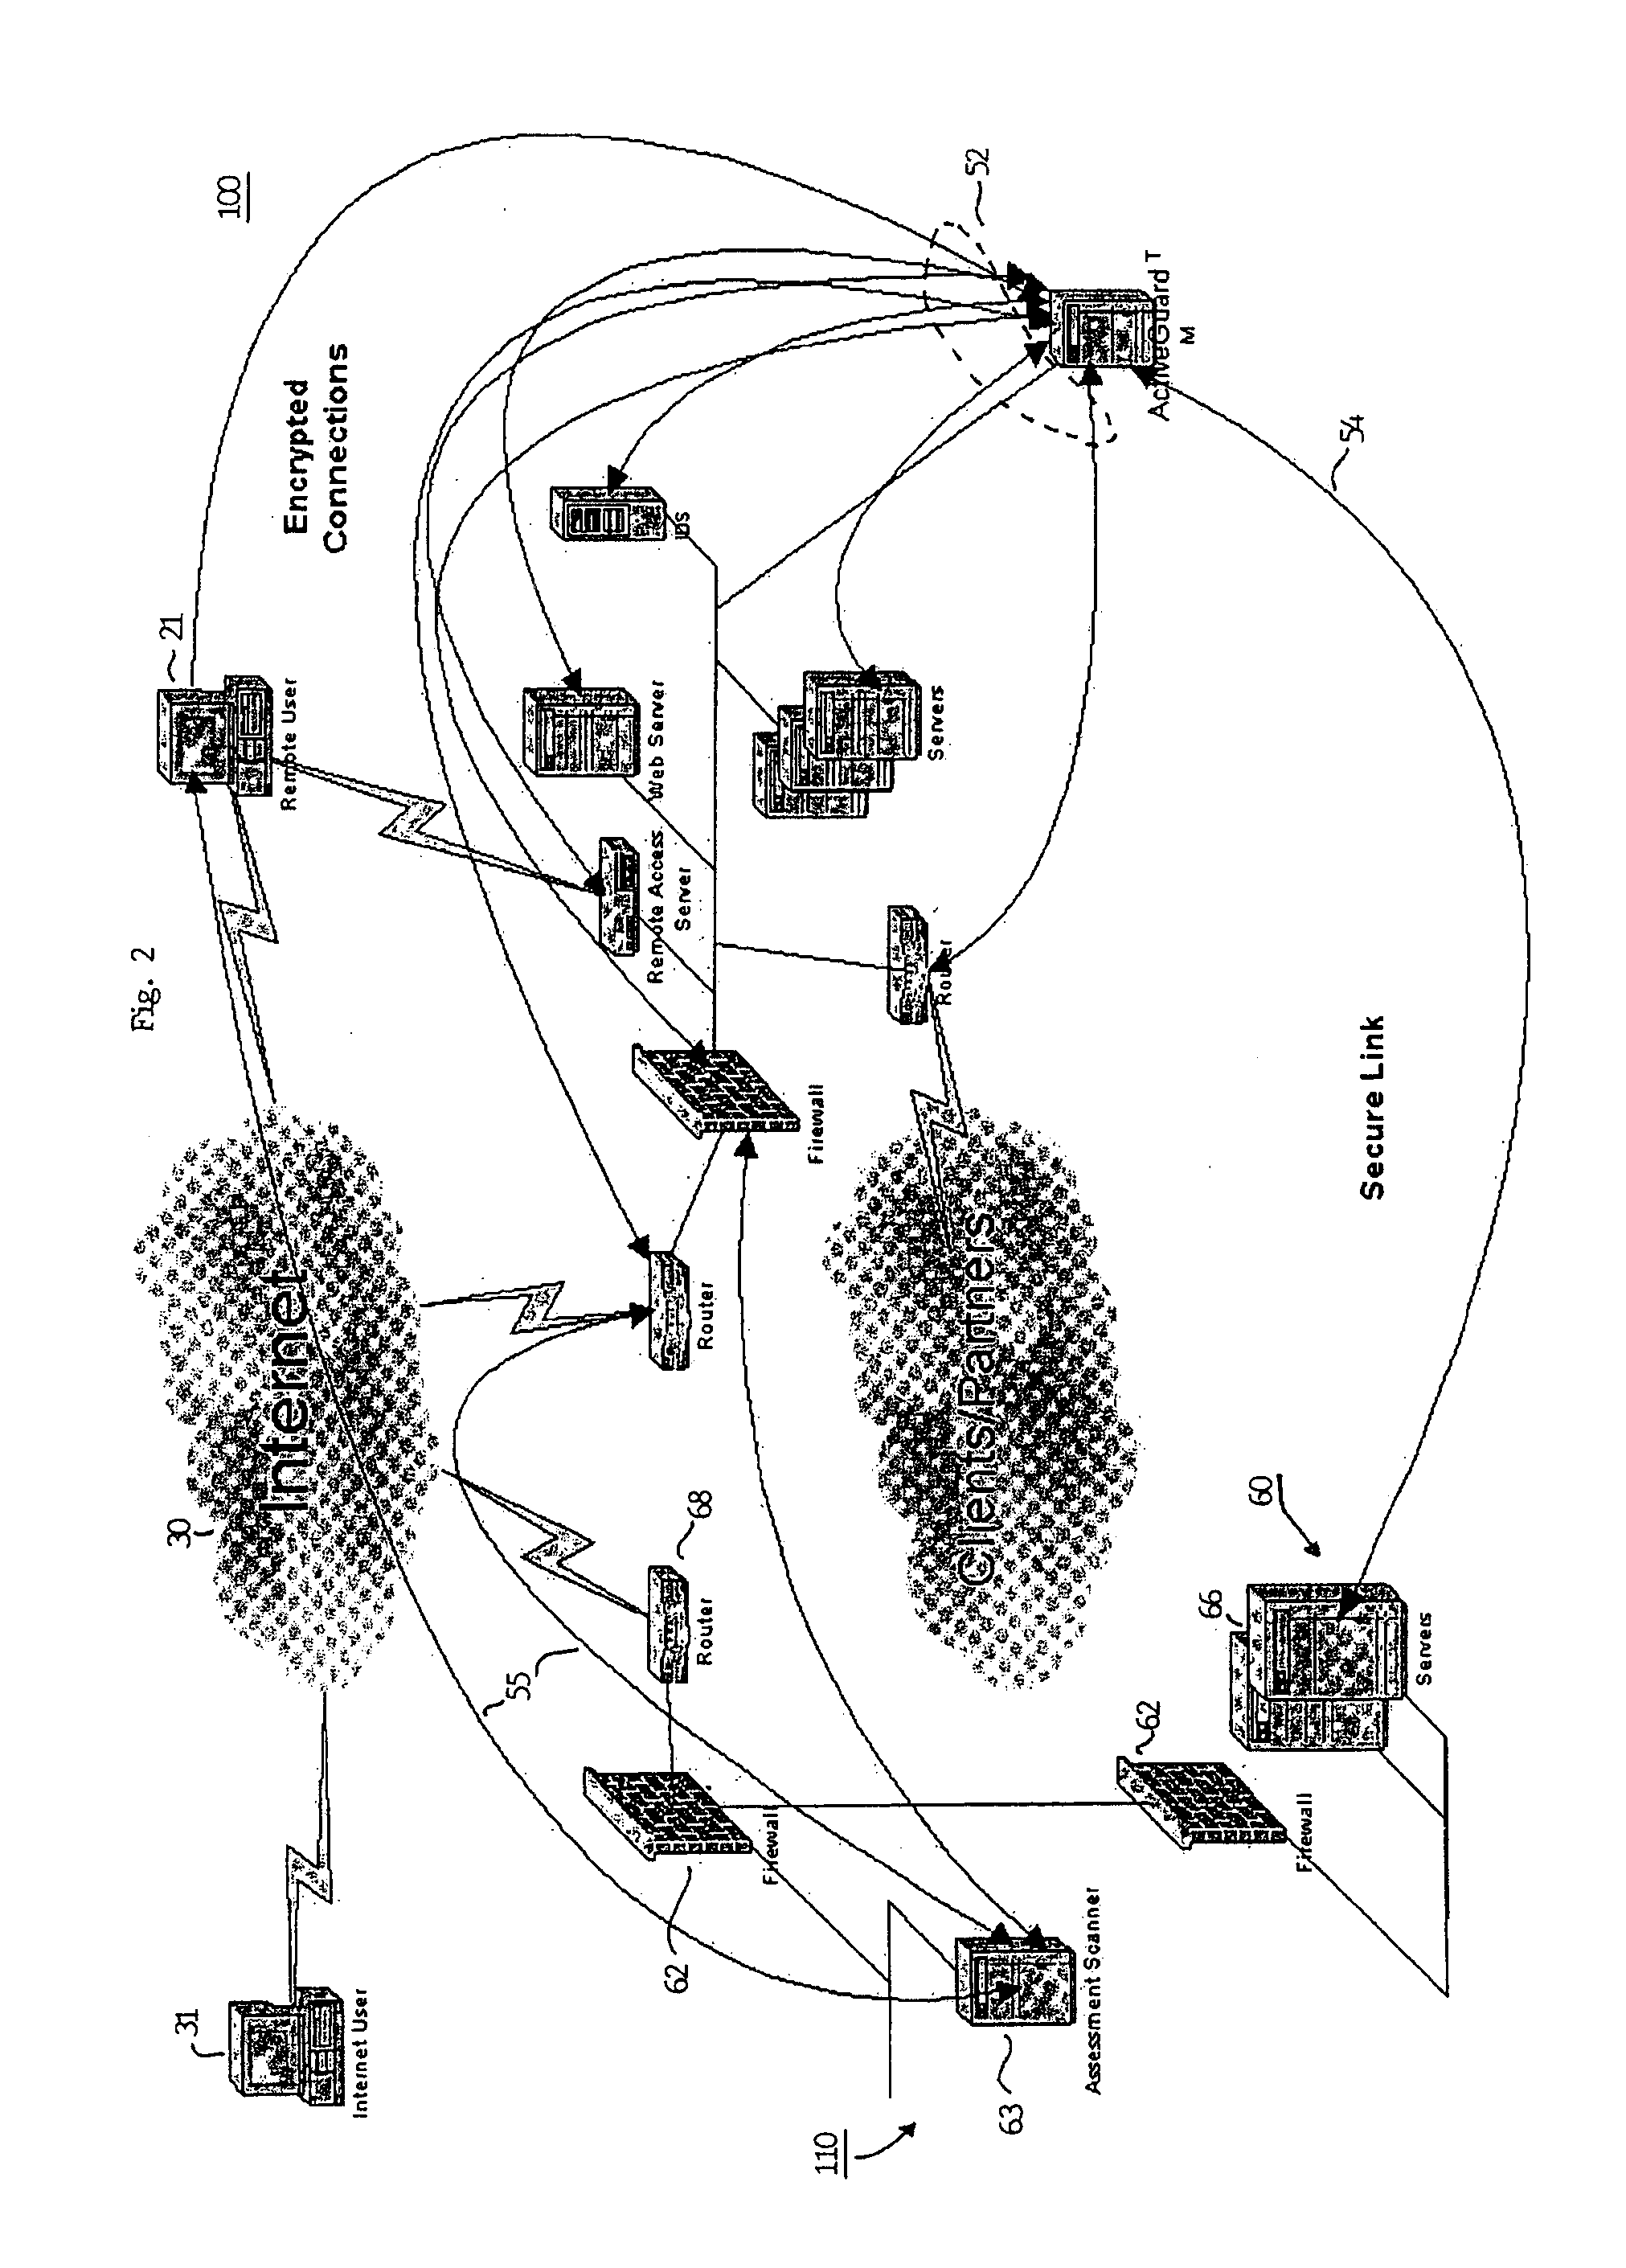 Method and apparatus for verifying the integrity and security of computer networks and implementing counter measures